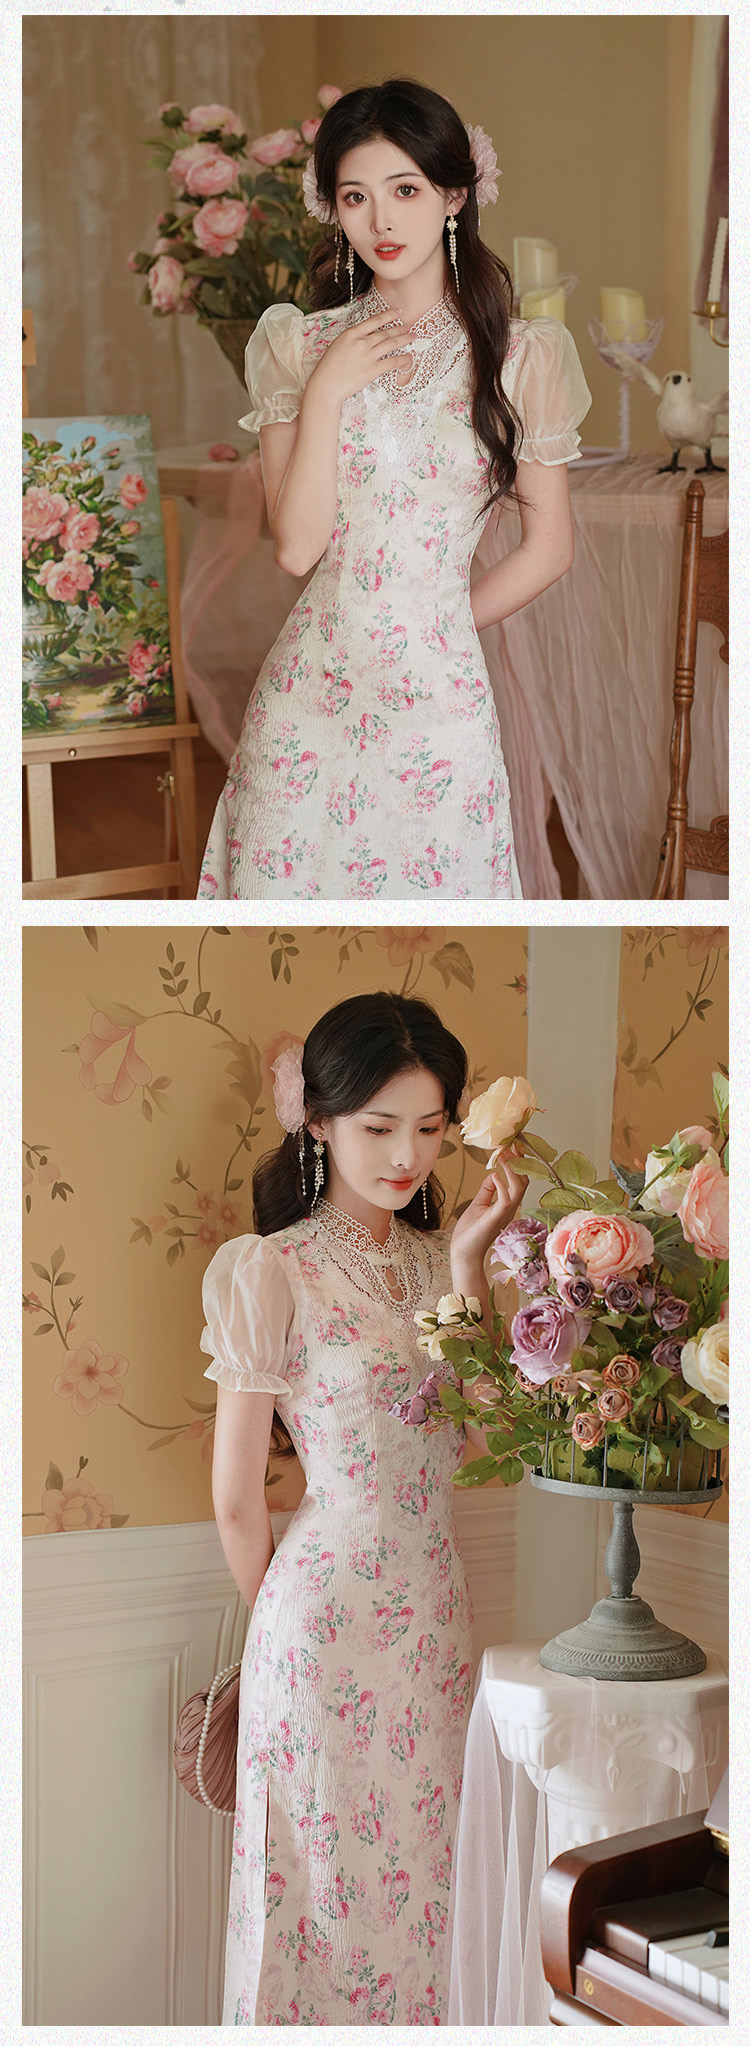 Aesthetic-Baroque-Rose-Floral-Casual-Dress-Daily-Work-Dating-Outfits10